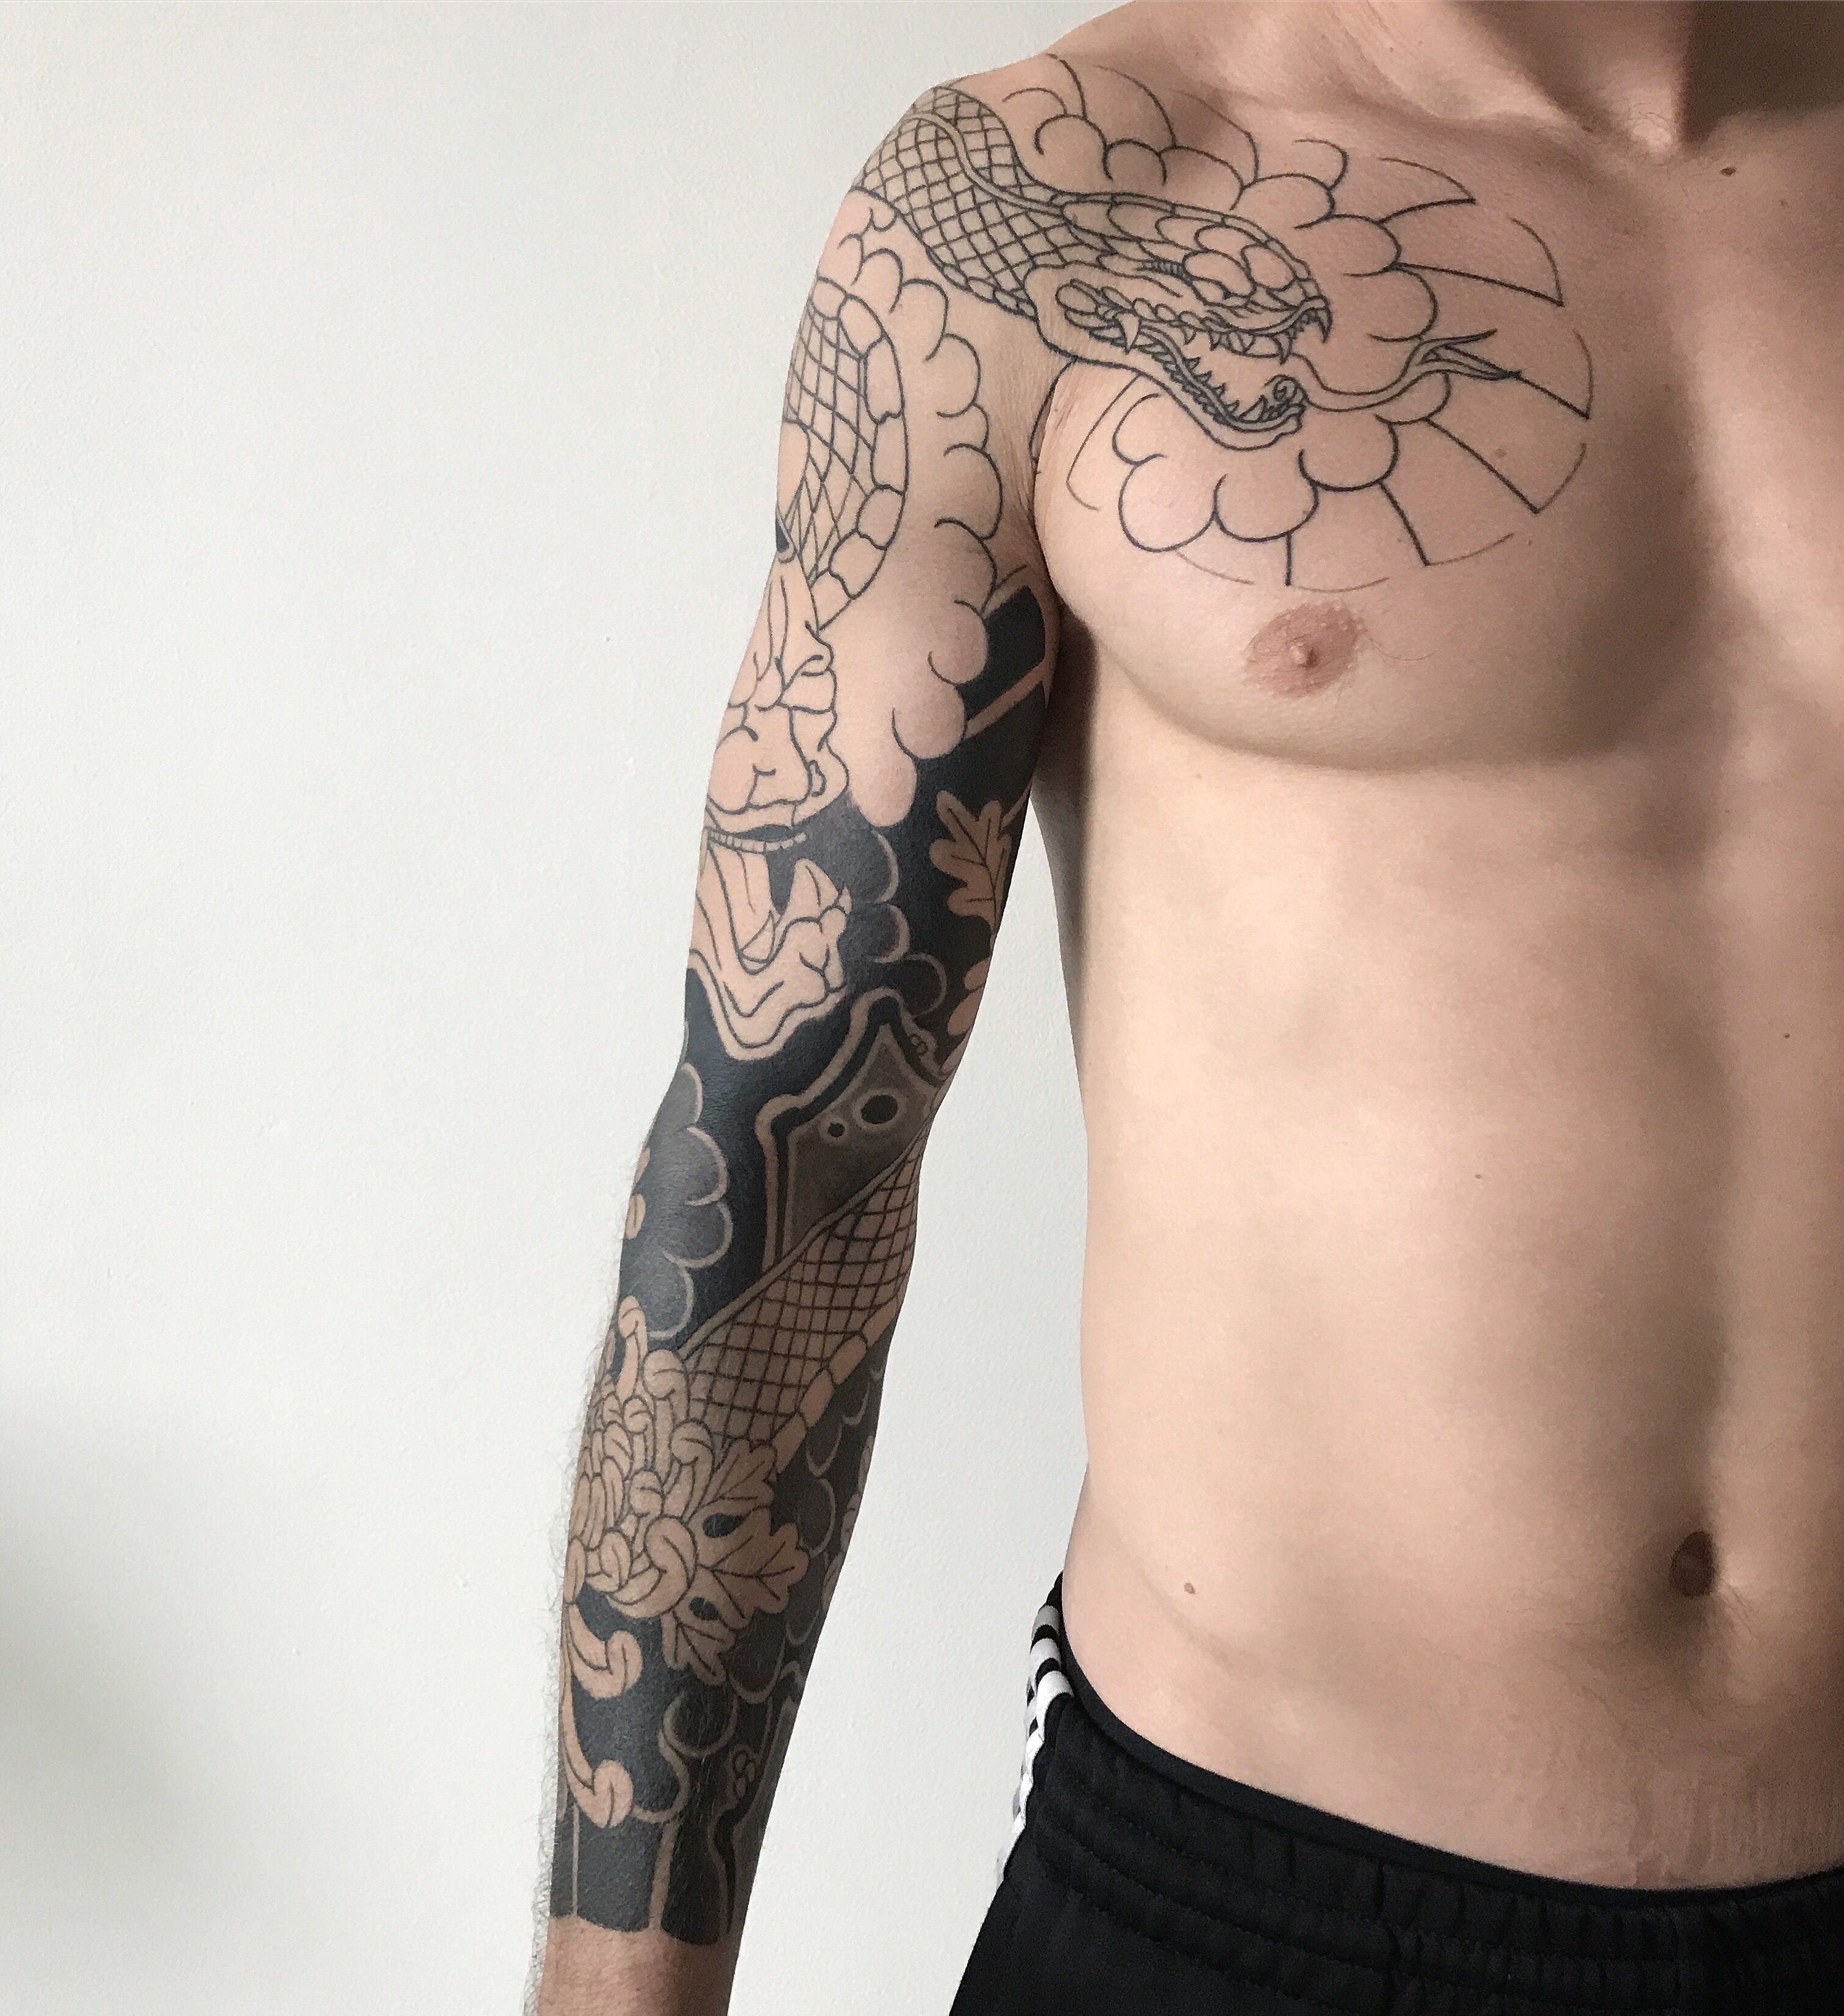 Half Sleeve Tattoos For Men  Ideas and Designs for Guys